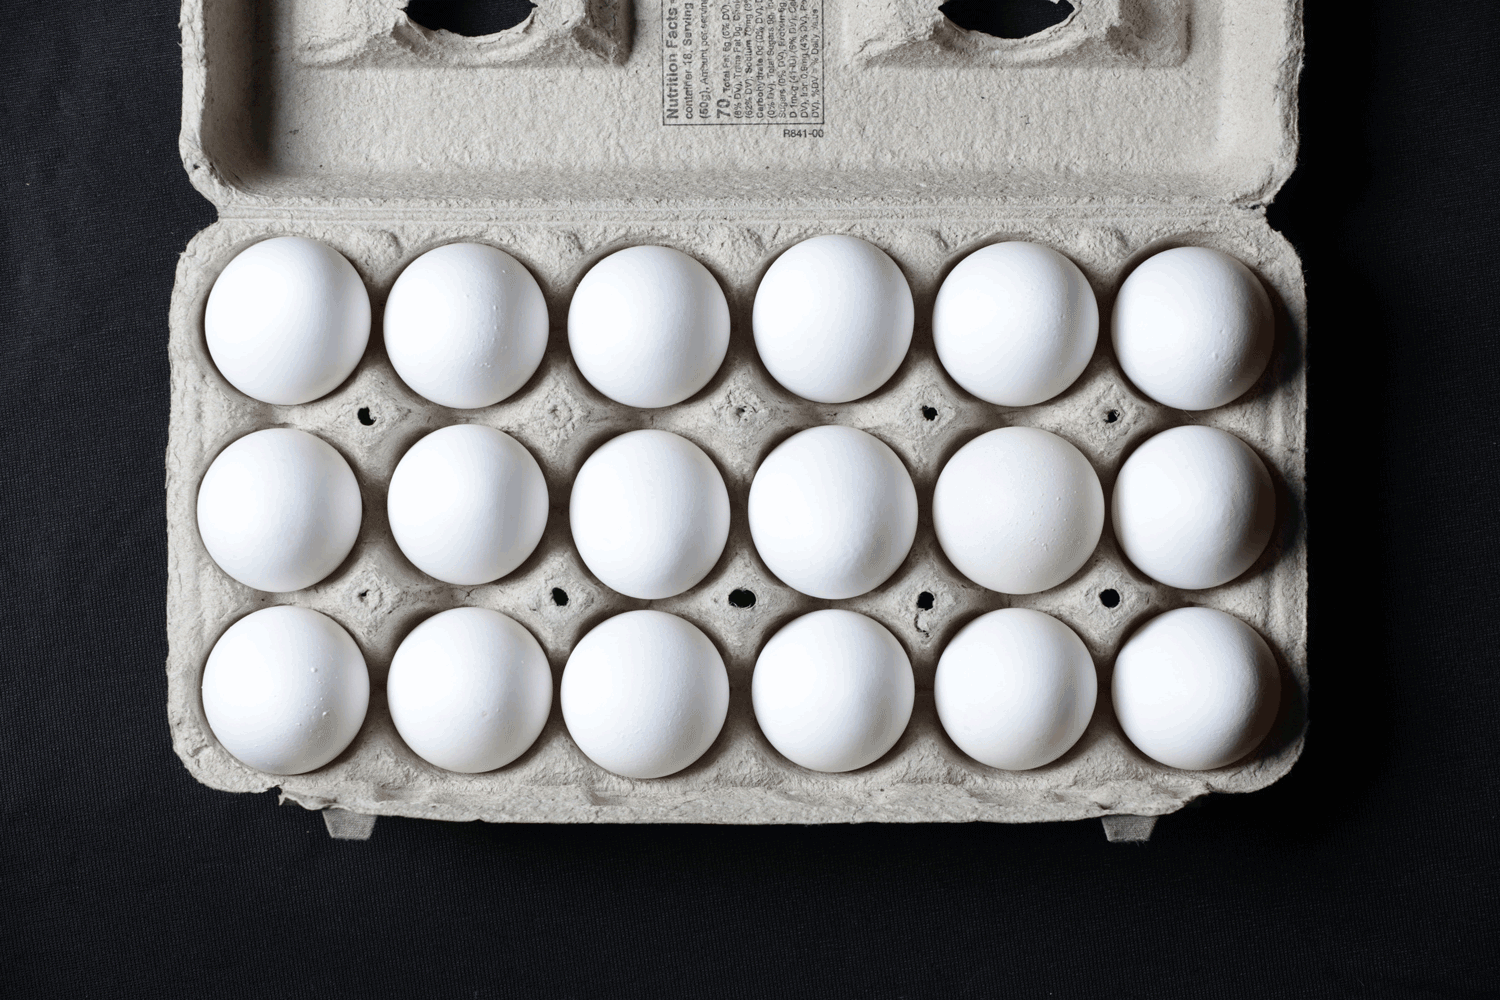 The egg shortage won't end anytime soon. Here's why | Crosscut